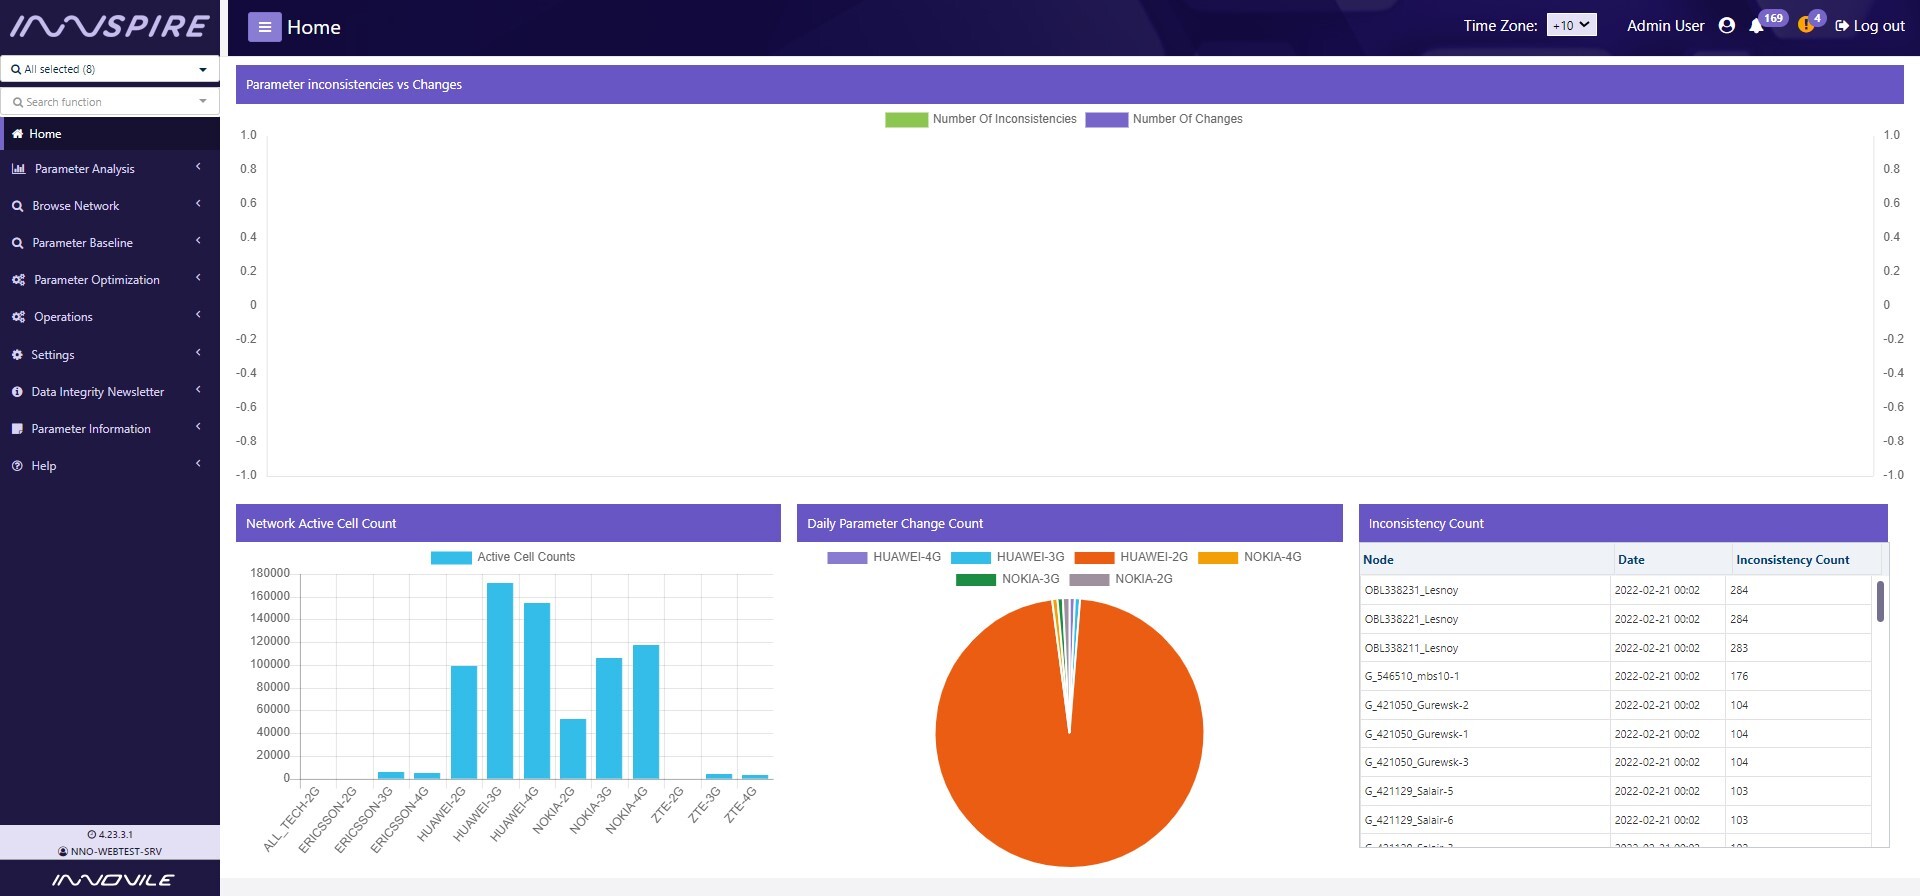 INNSPIRE - Mobile Configuration Management System Dashboard Page